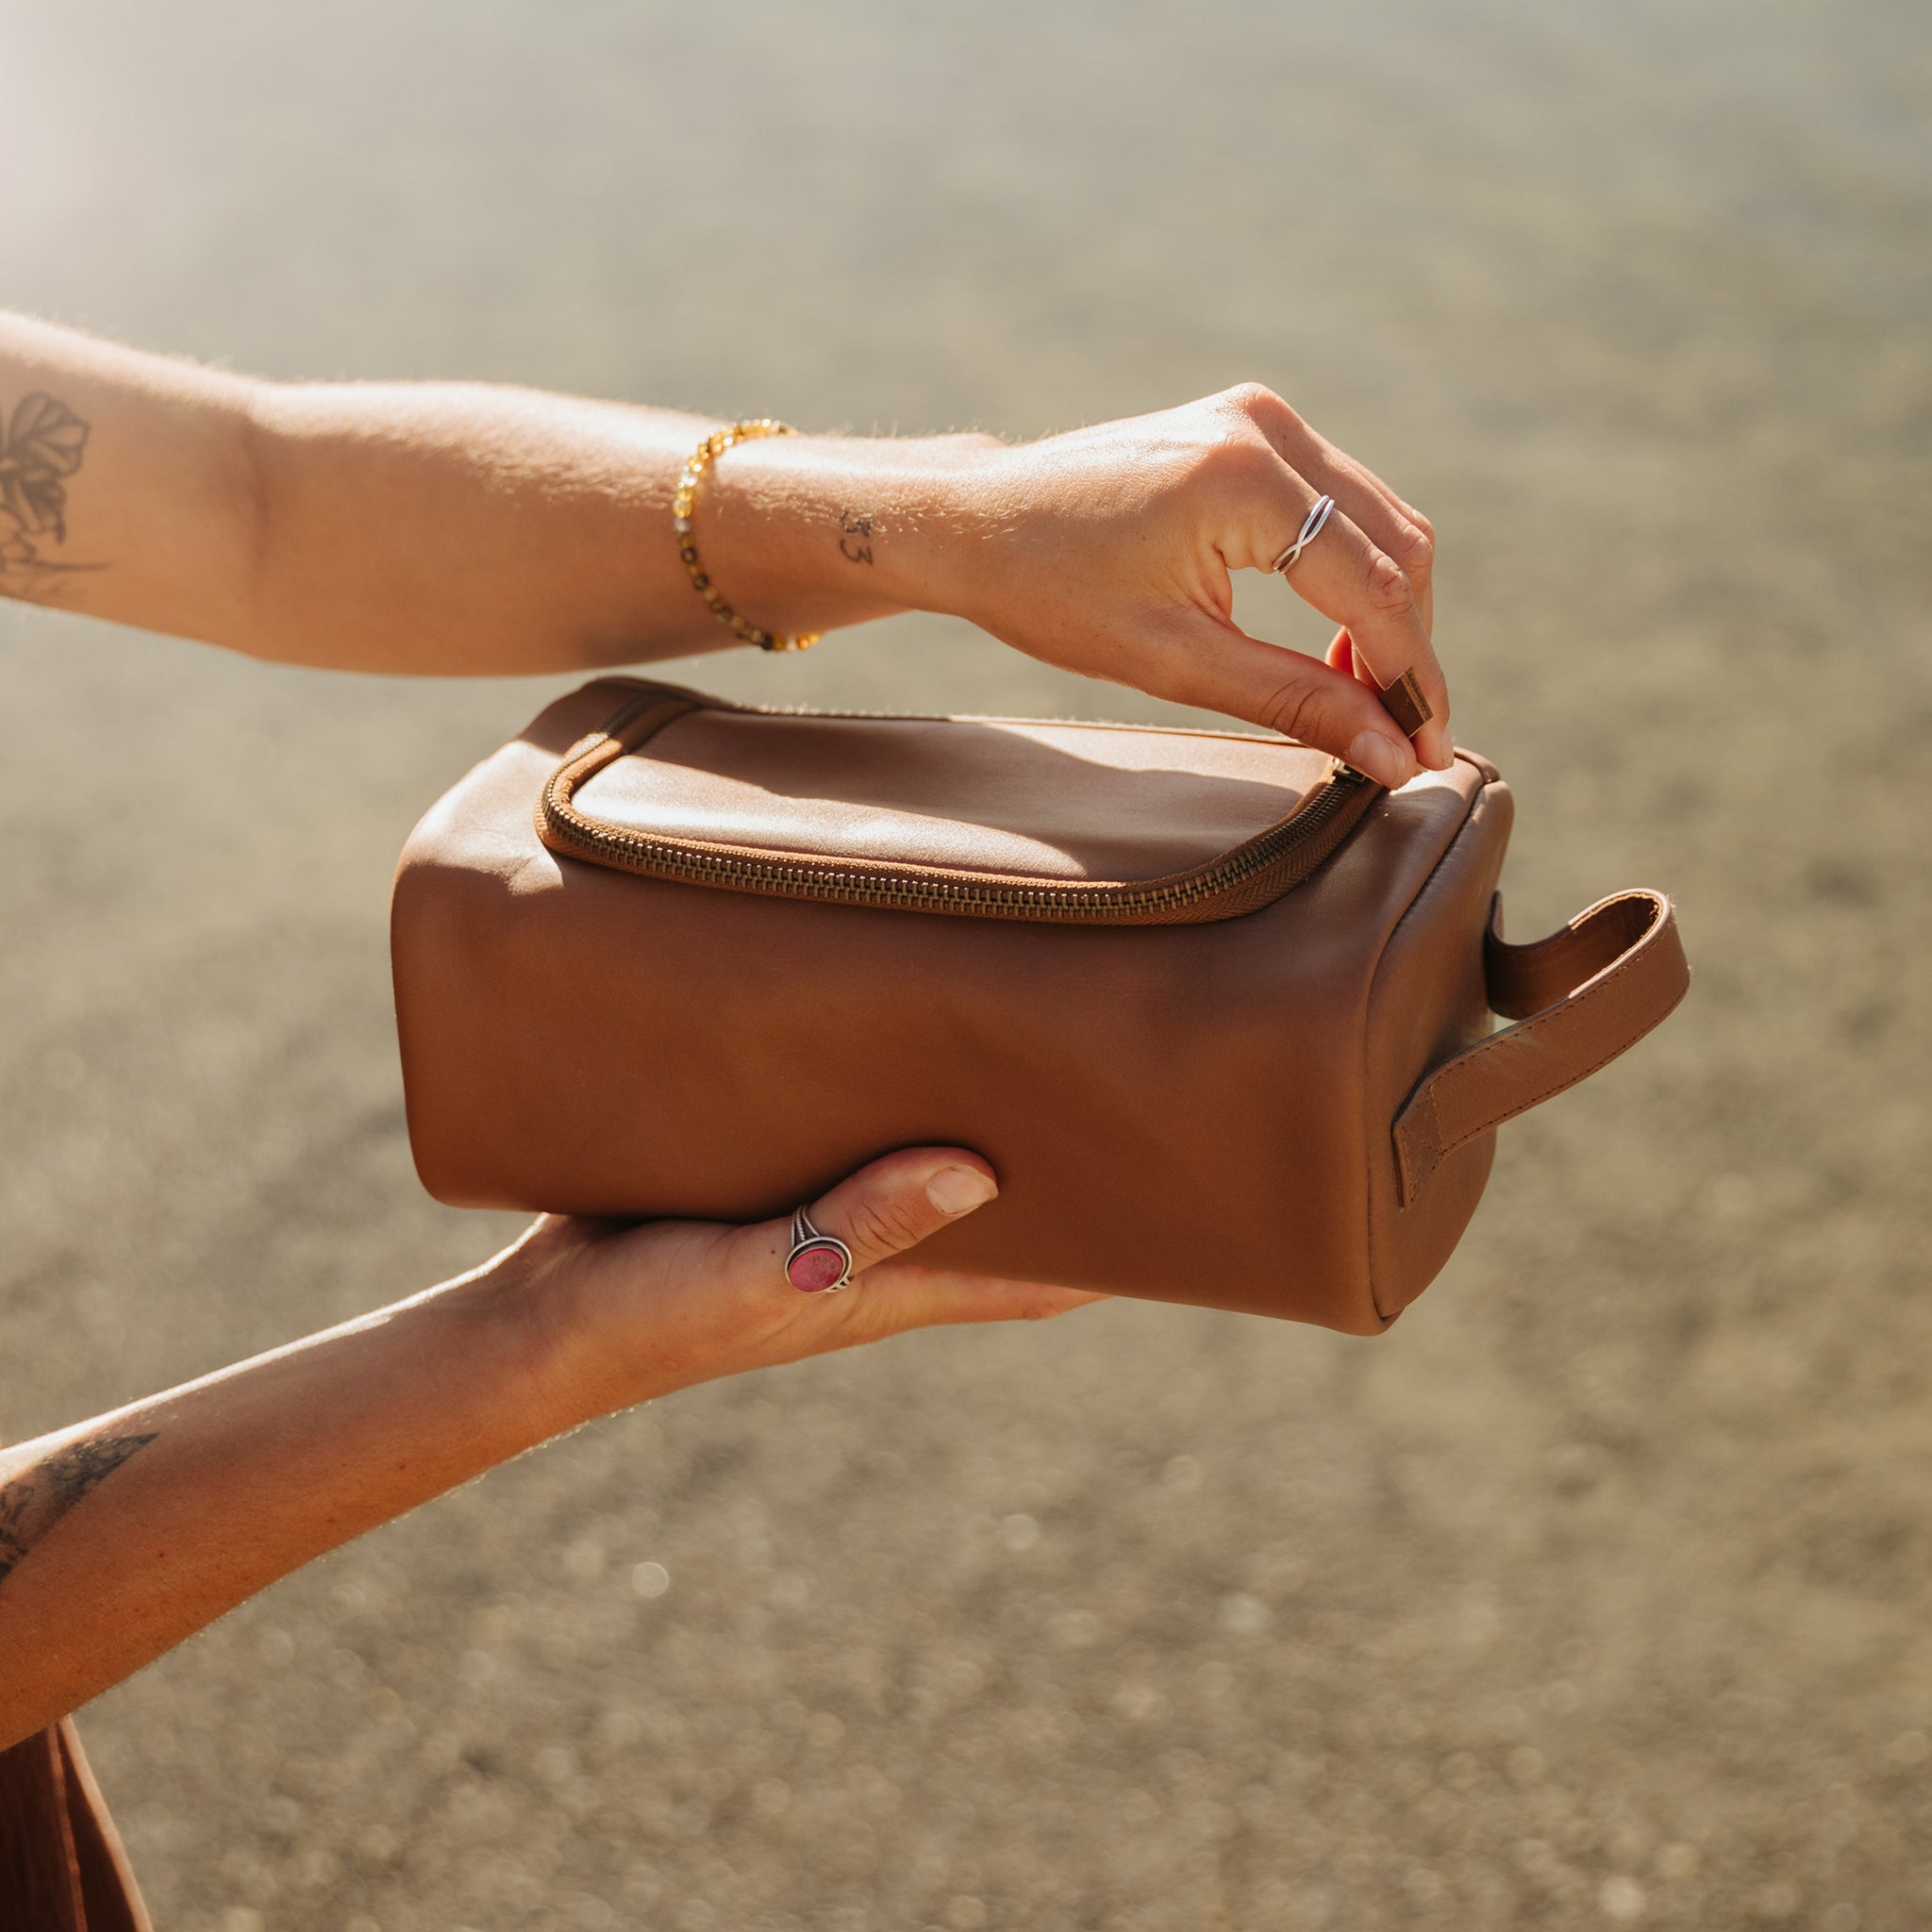 Ralph Leather Wash Bag in Tan by Duffle&Co